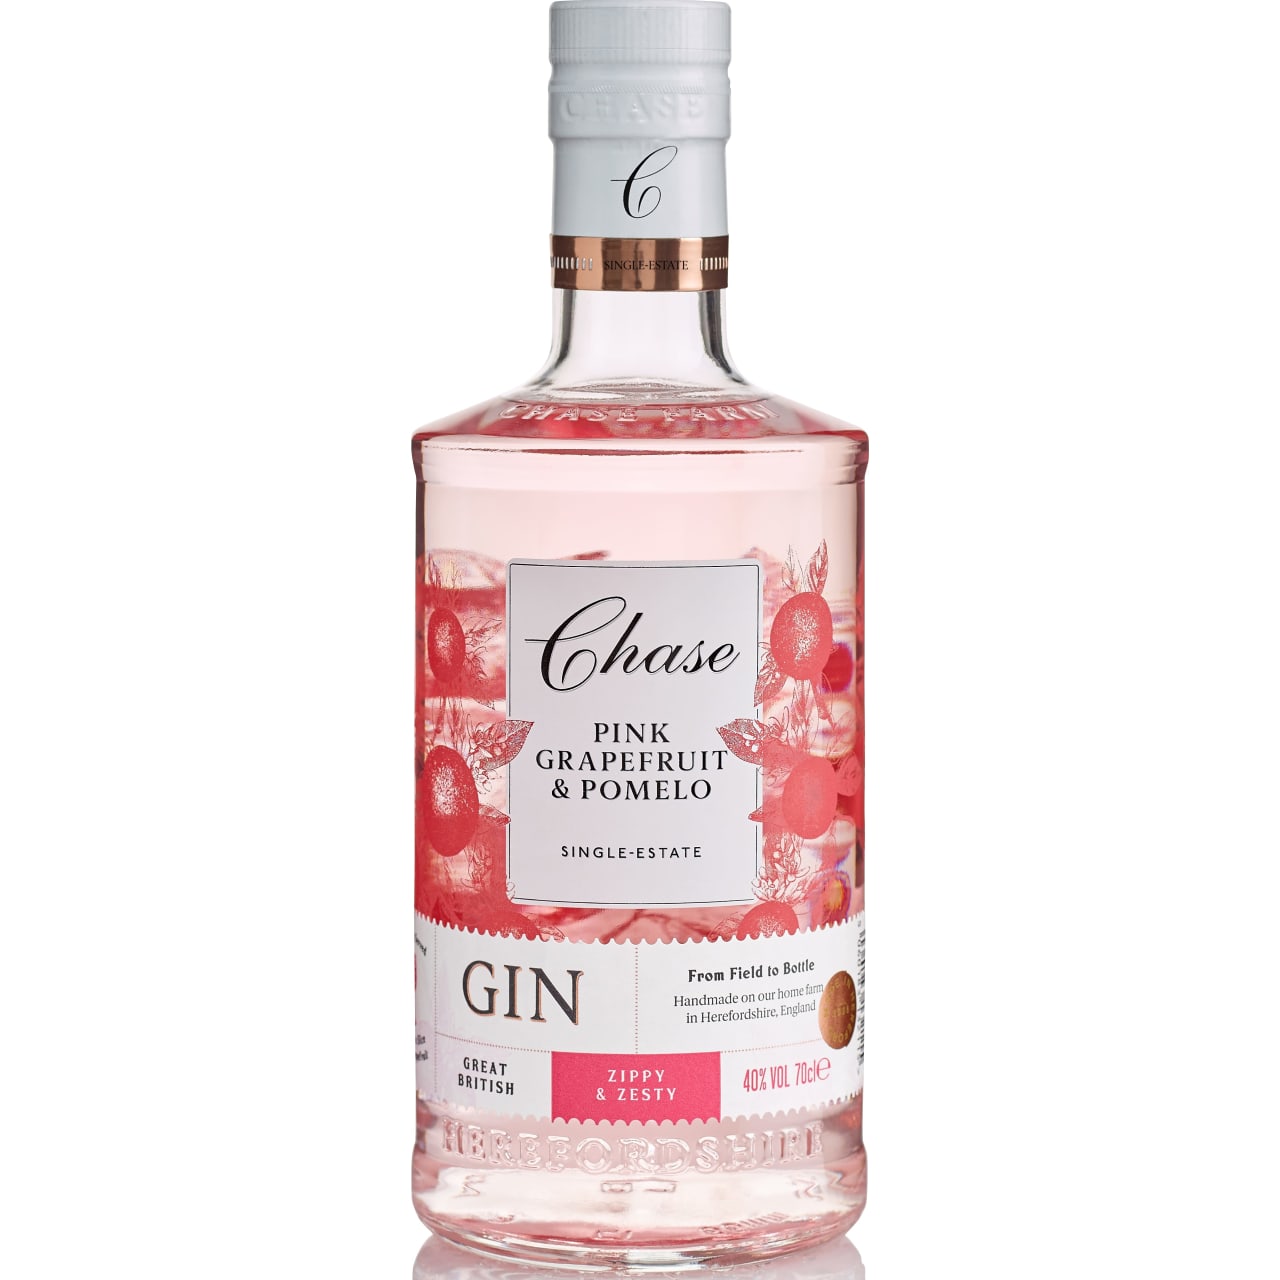 This zippy and zesty pink gin is bursting with grapefruit freshness, juniper and lime.